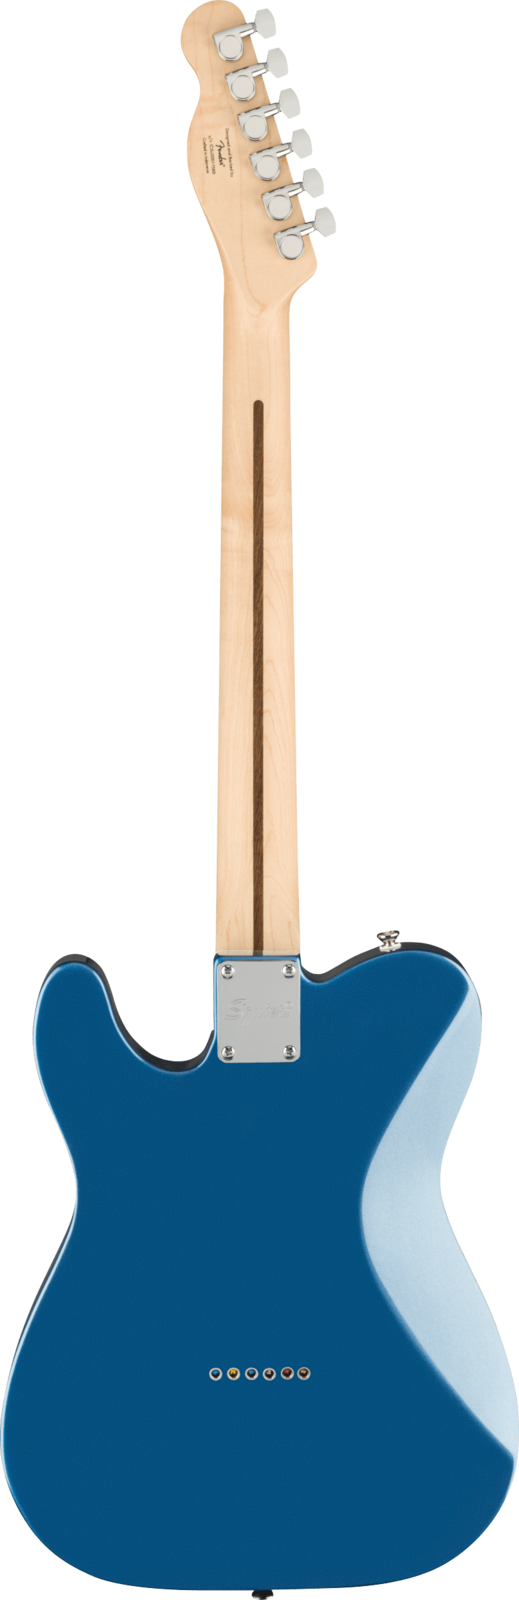 Squier Affinity Telecaster Lake Placid Blue